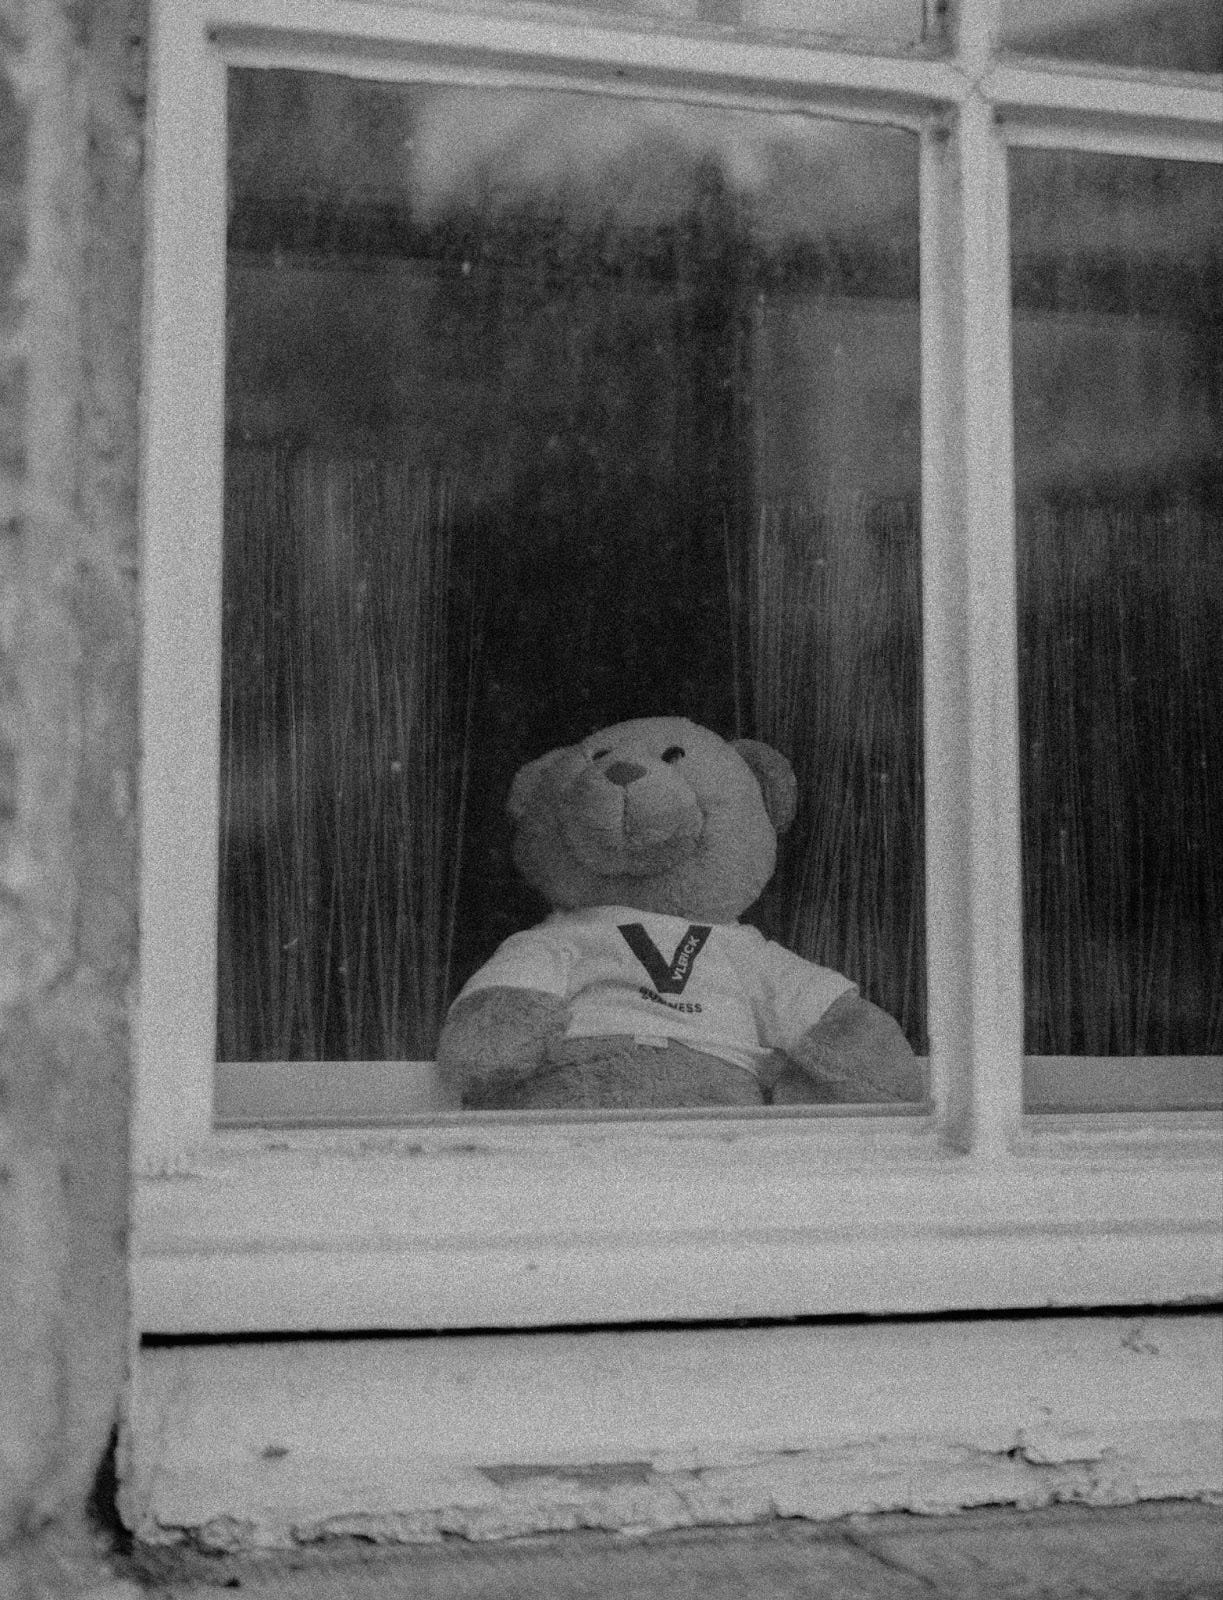 black and white, teddy bear leaning against window, alone looking out